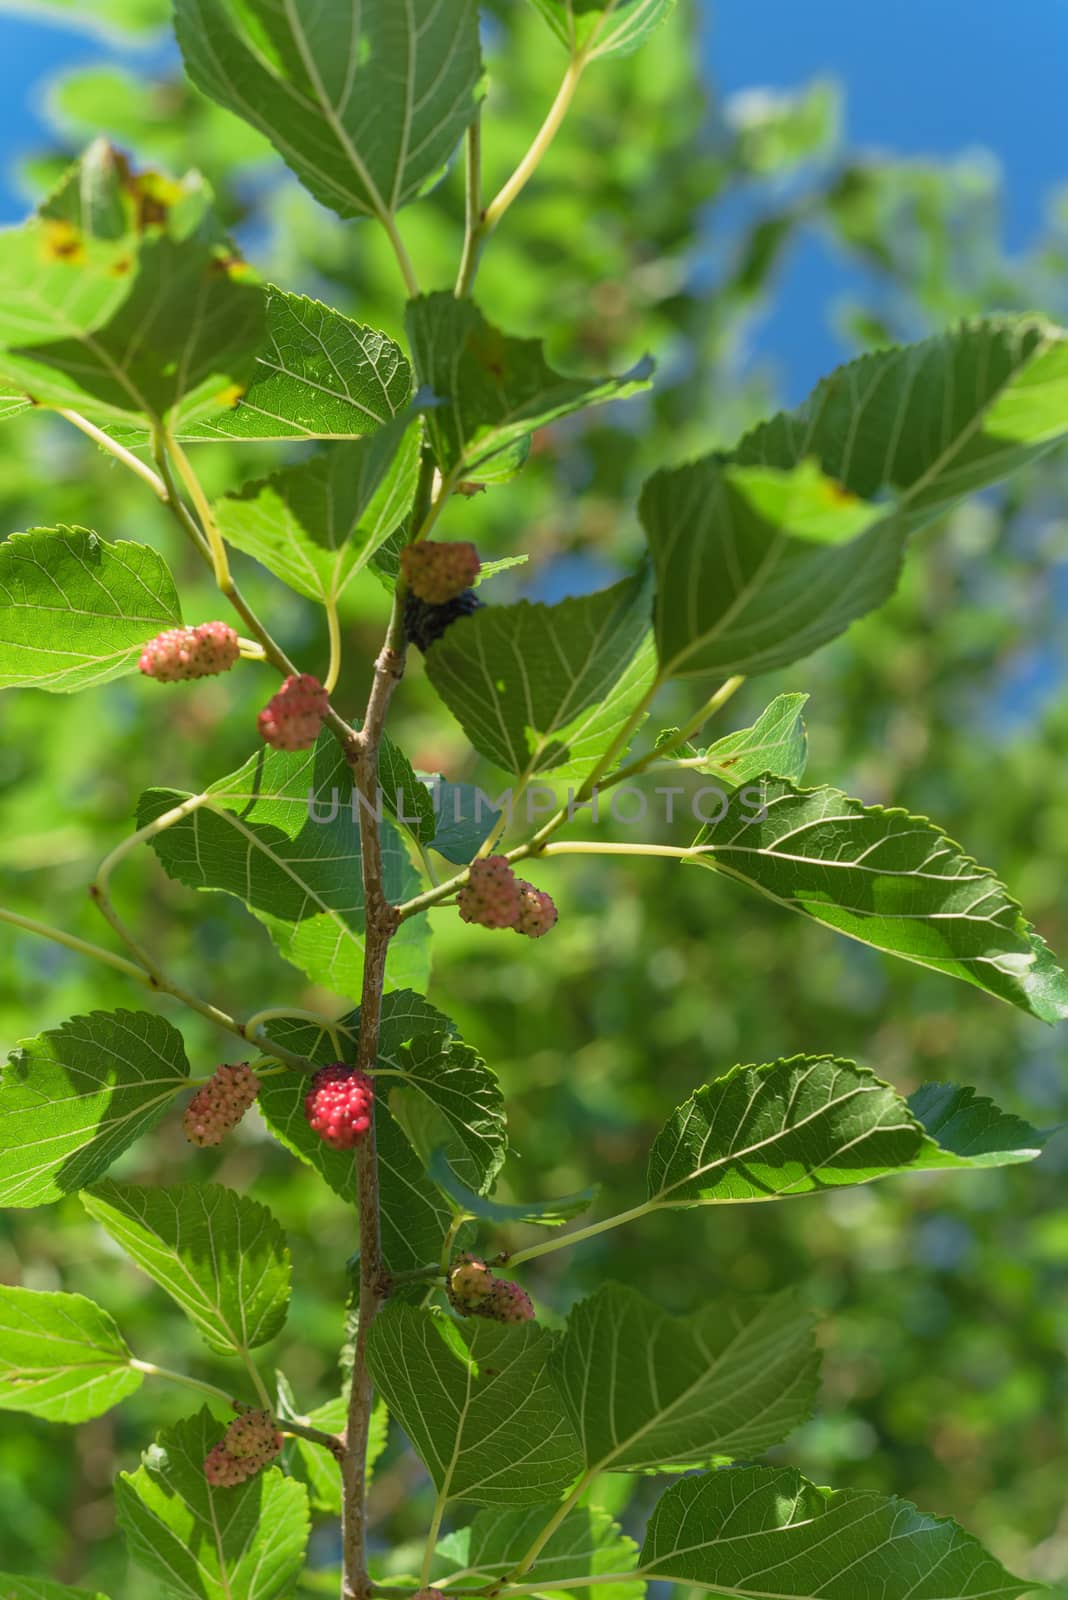 Close-up view of sweet black mulberry morus nigra growing on tree branches near Dallas, Texas, America. Mulberries fruits ready to pickup in May harvest season